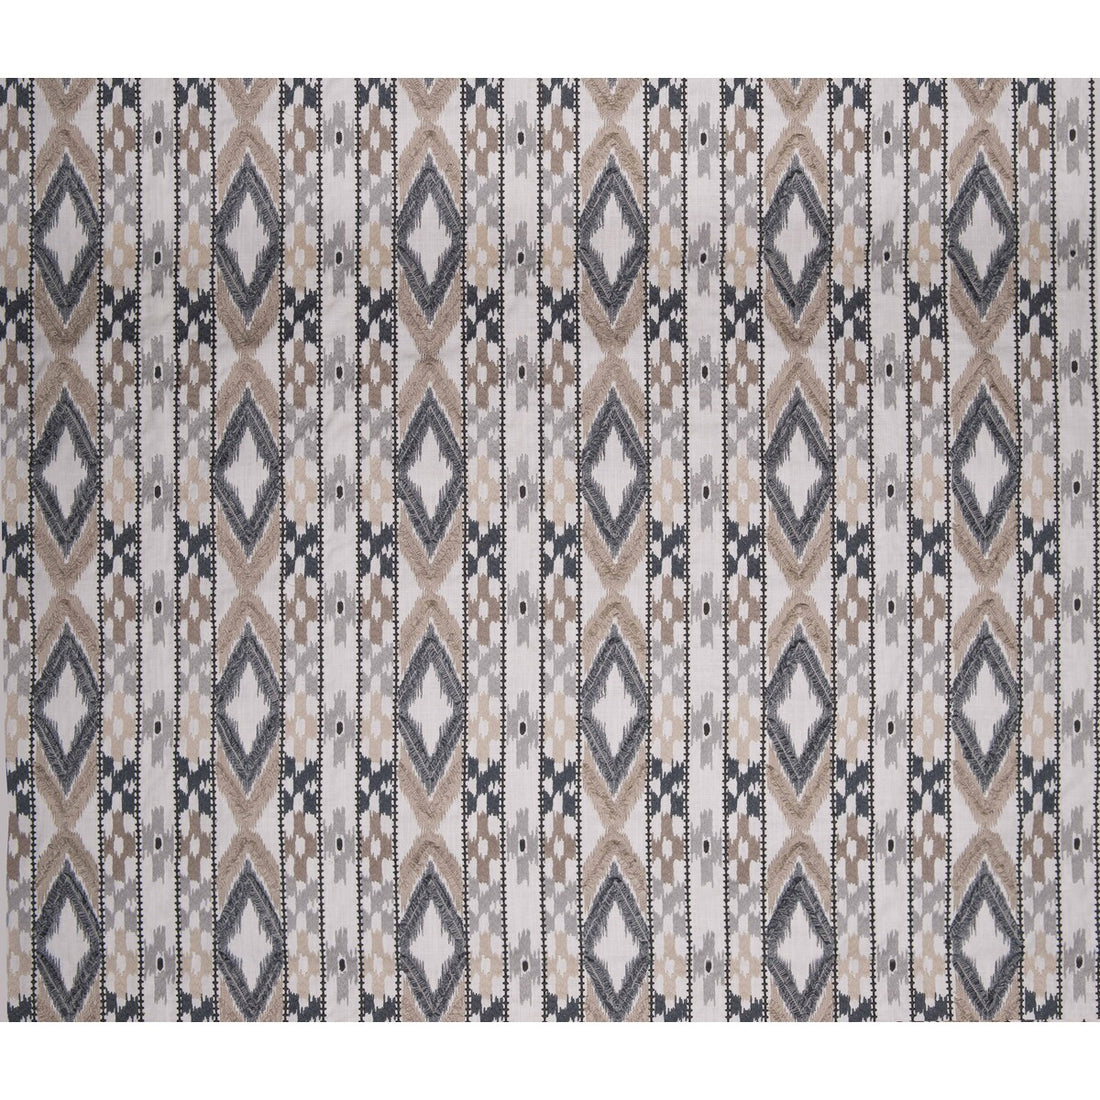 Queen fabric in beige/gris color - pattern GDT5403.5.0 - by Gaston y Daniela in the Gaston Africalia collection